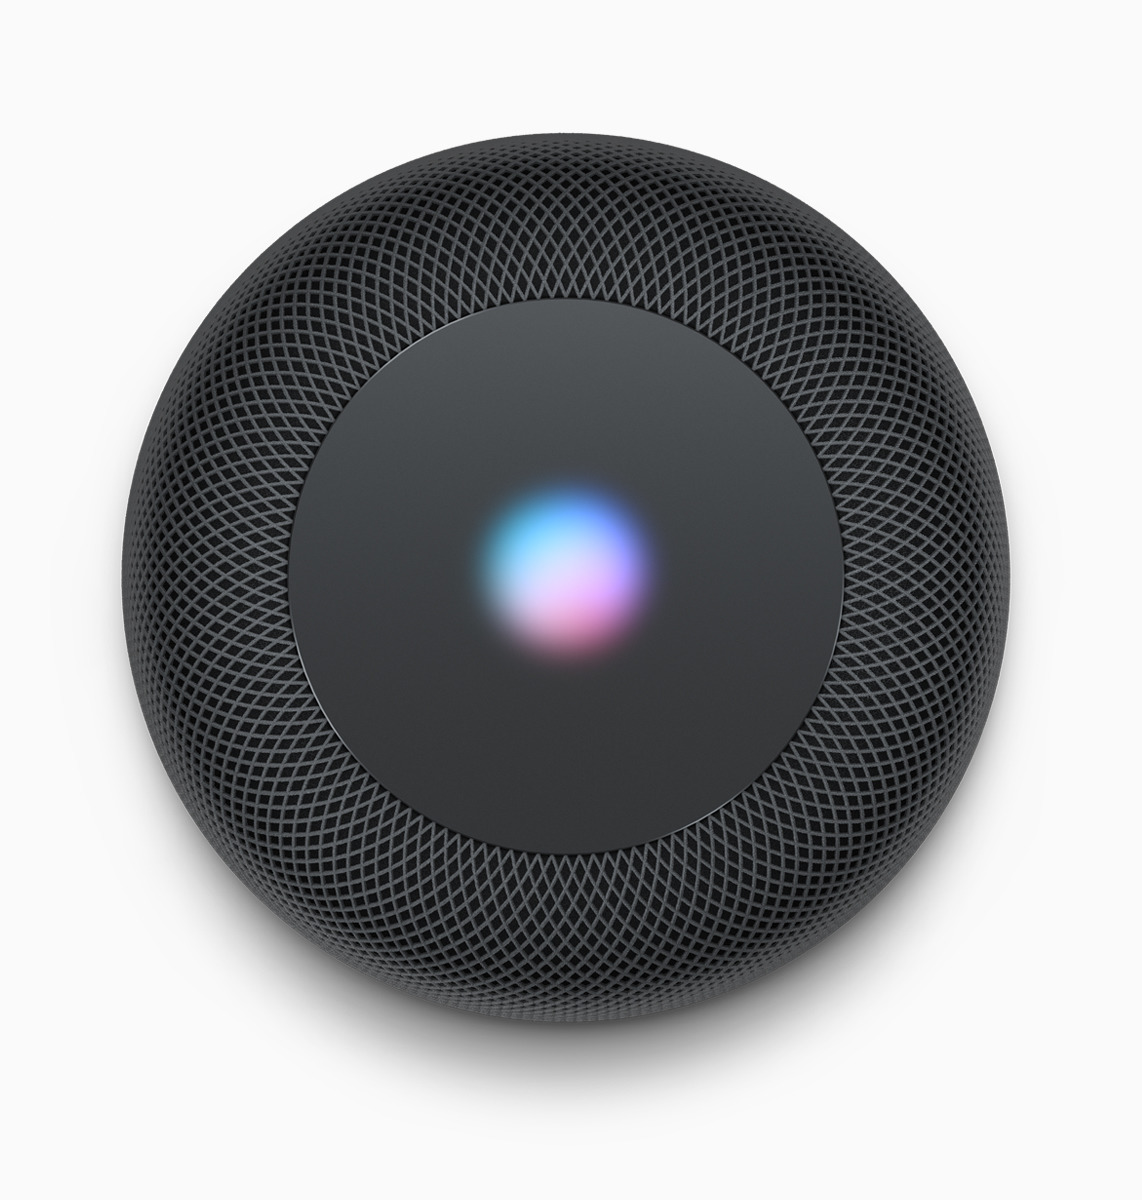 The light on top of the HomePod gives you the status of Siri and activity